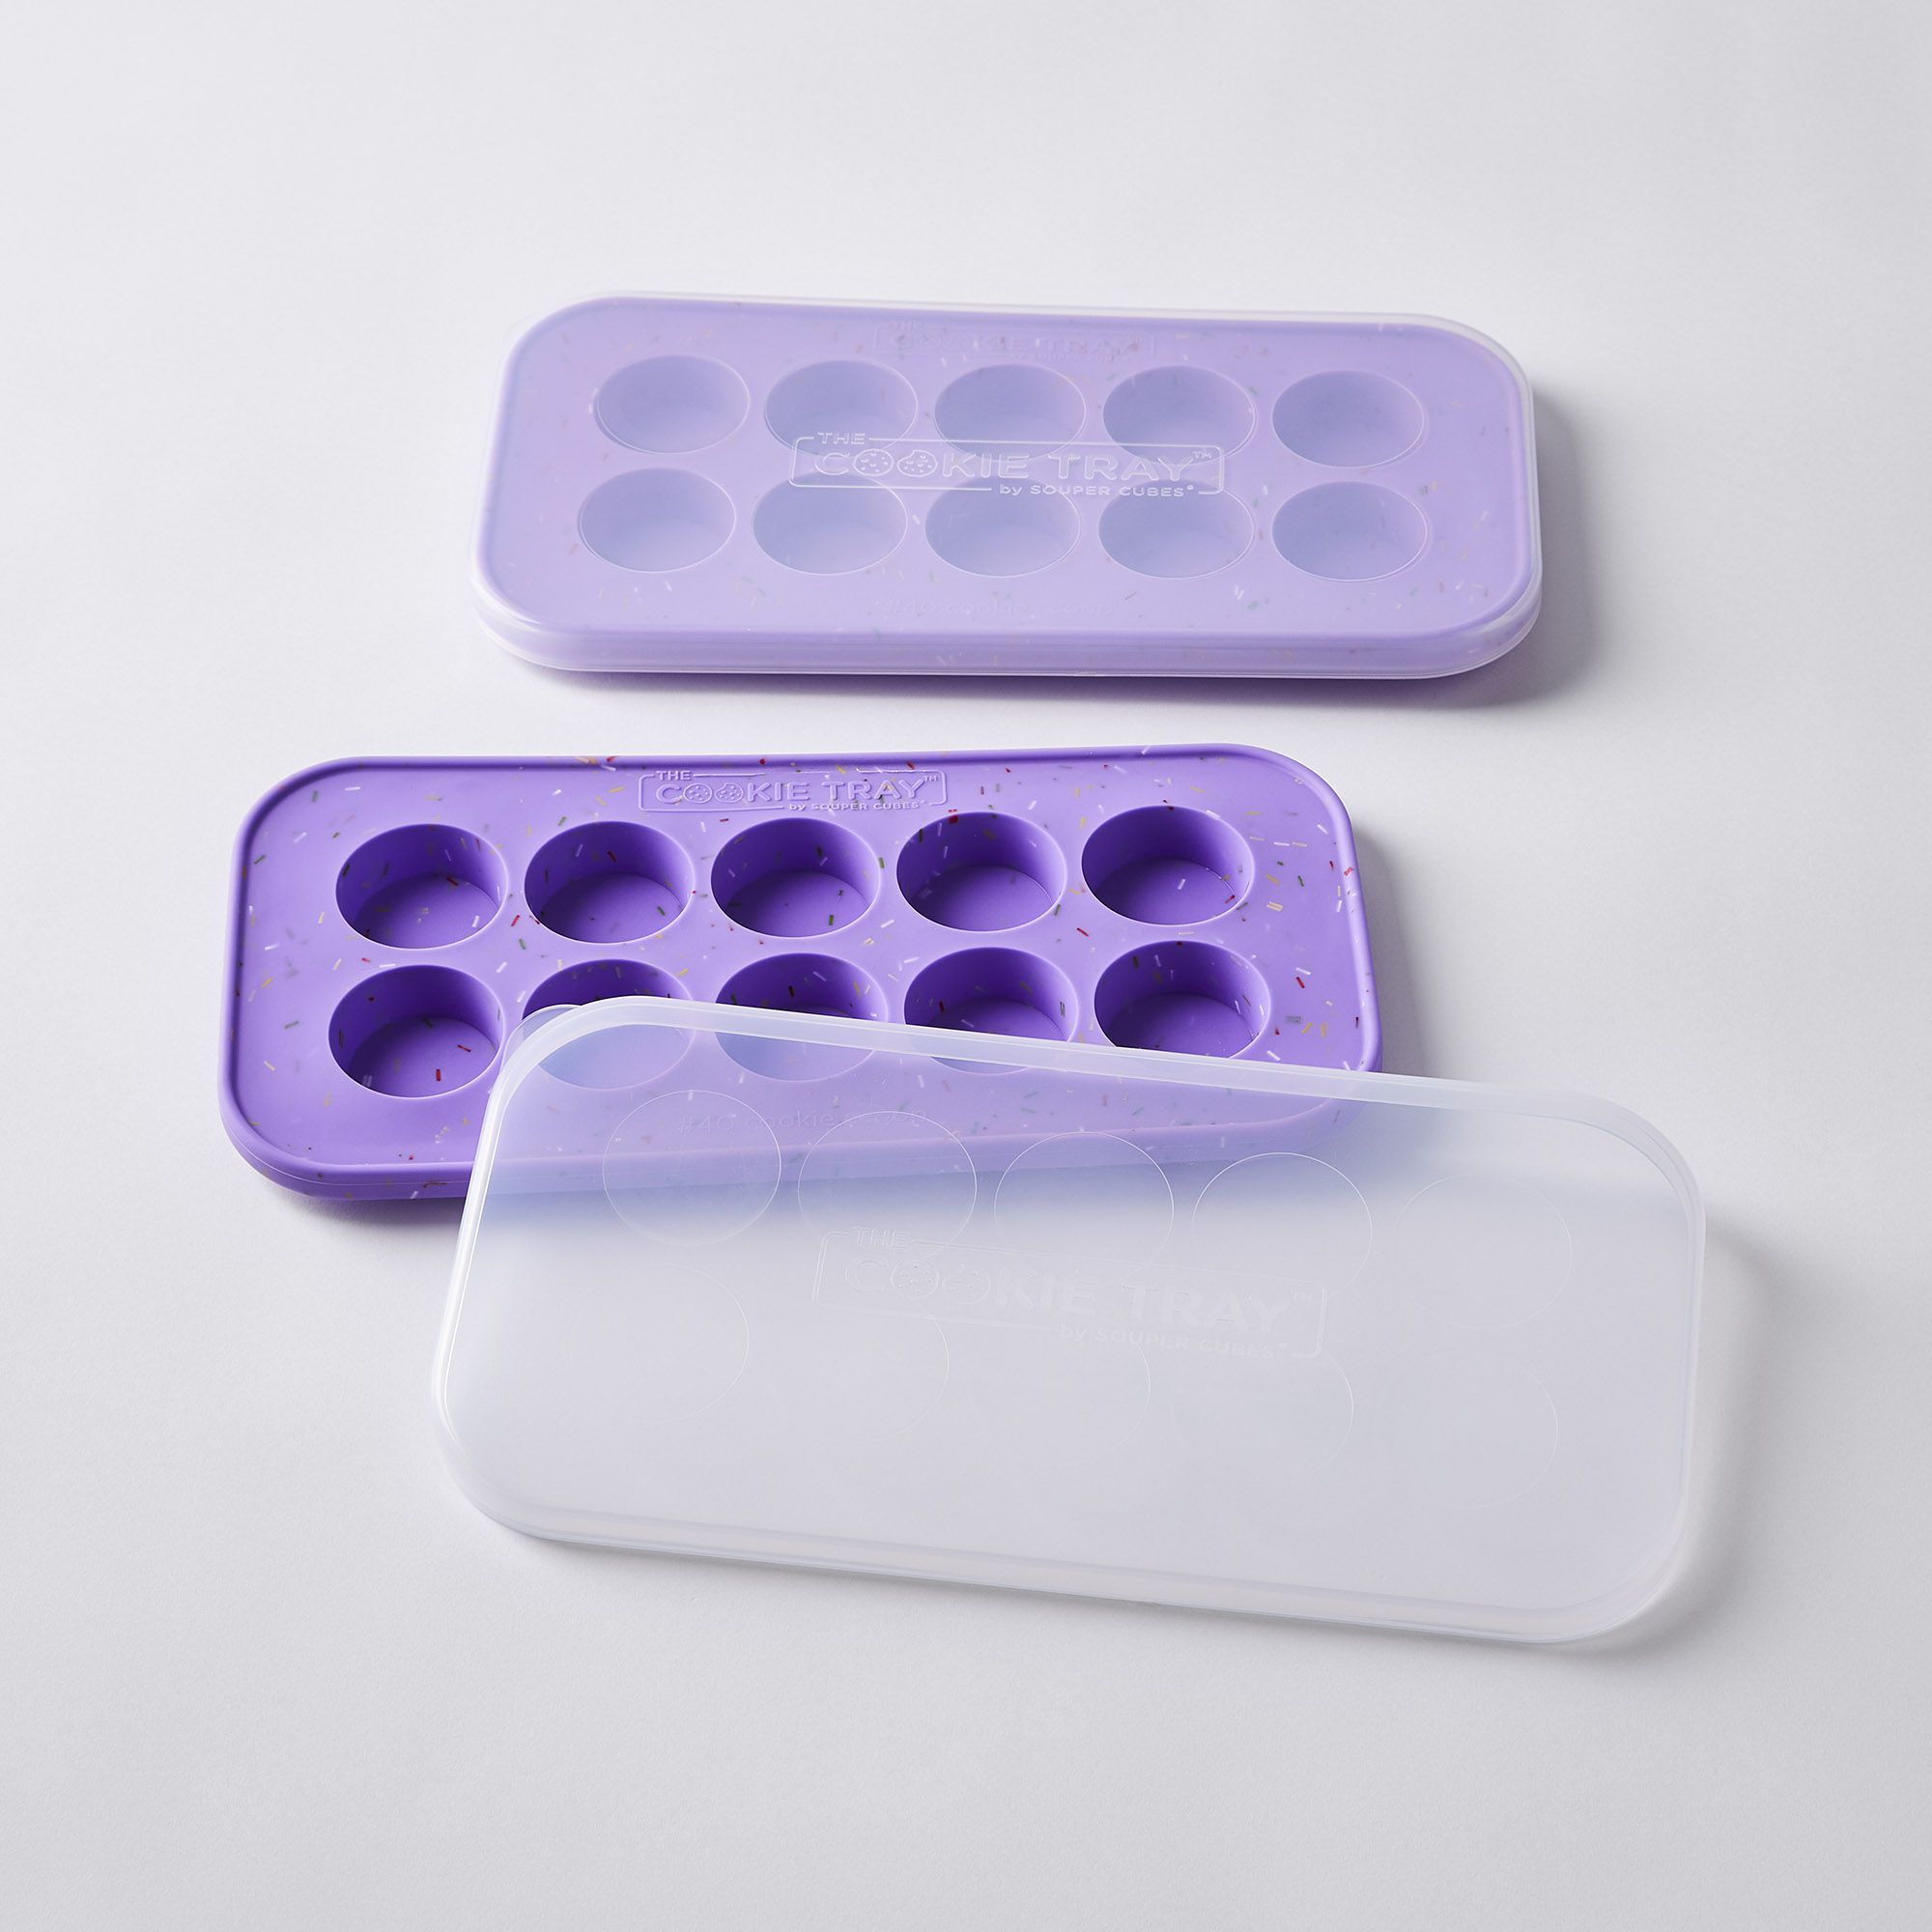 Souper Cubes The Cookie Tray - Silicone Molds for Baking - Freeze and Store  Perfect Cookie Dough Rounds - Convenient Baking Supplies - Lavender With